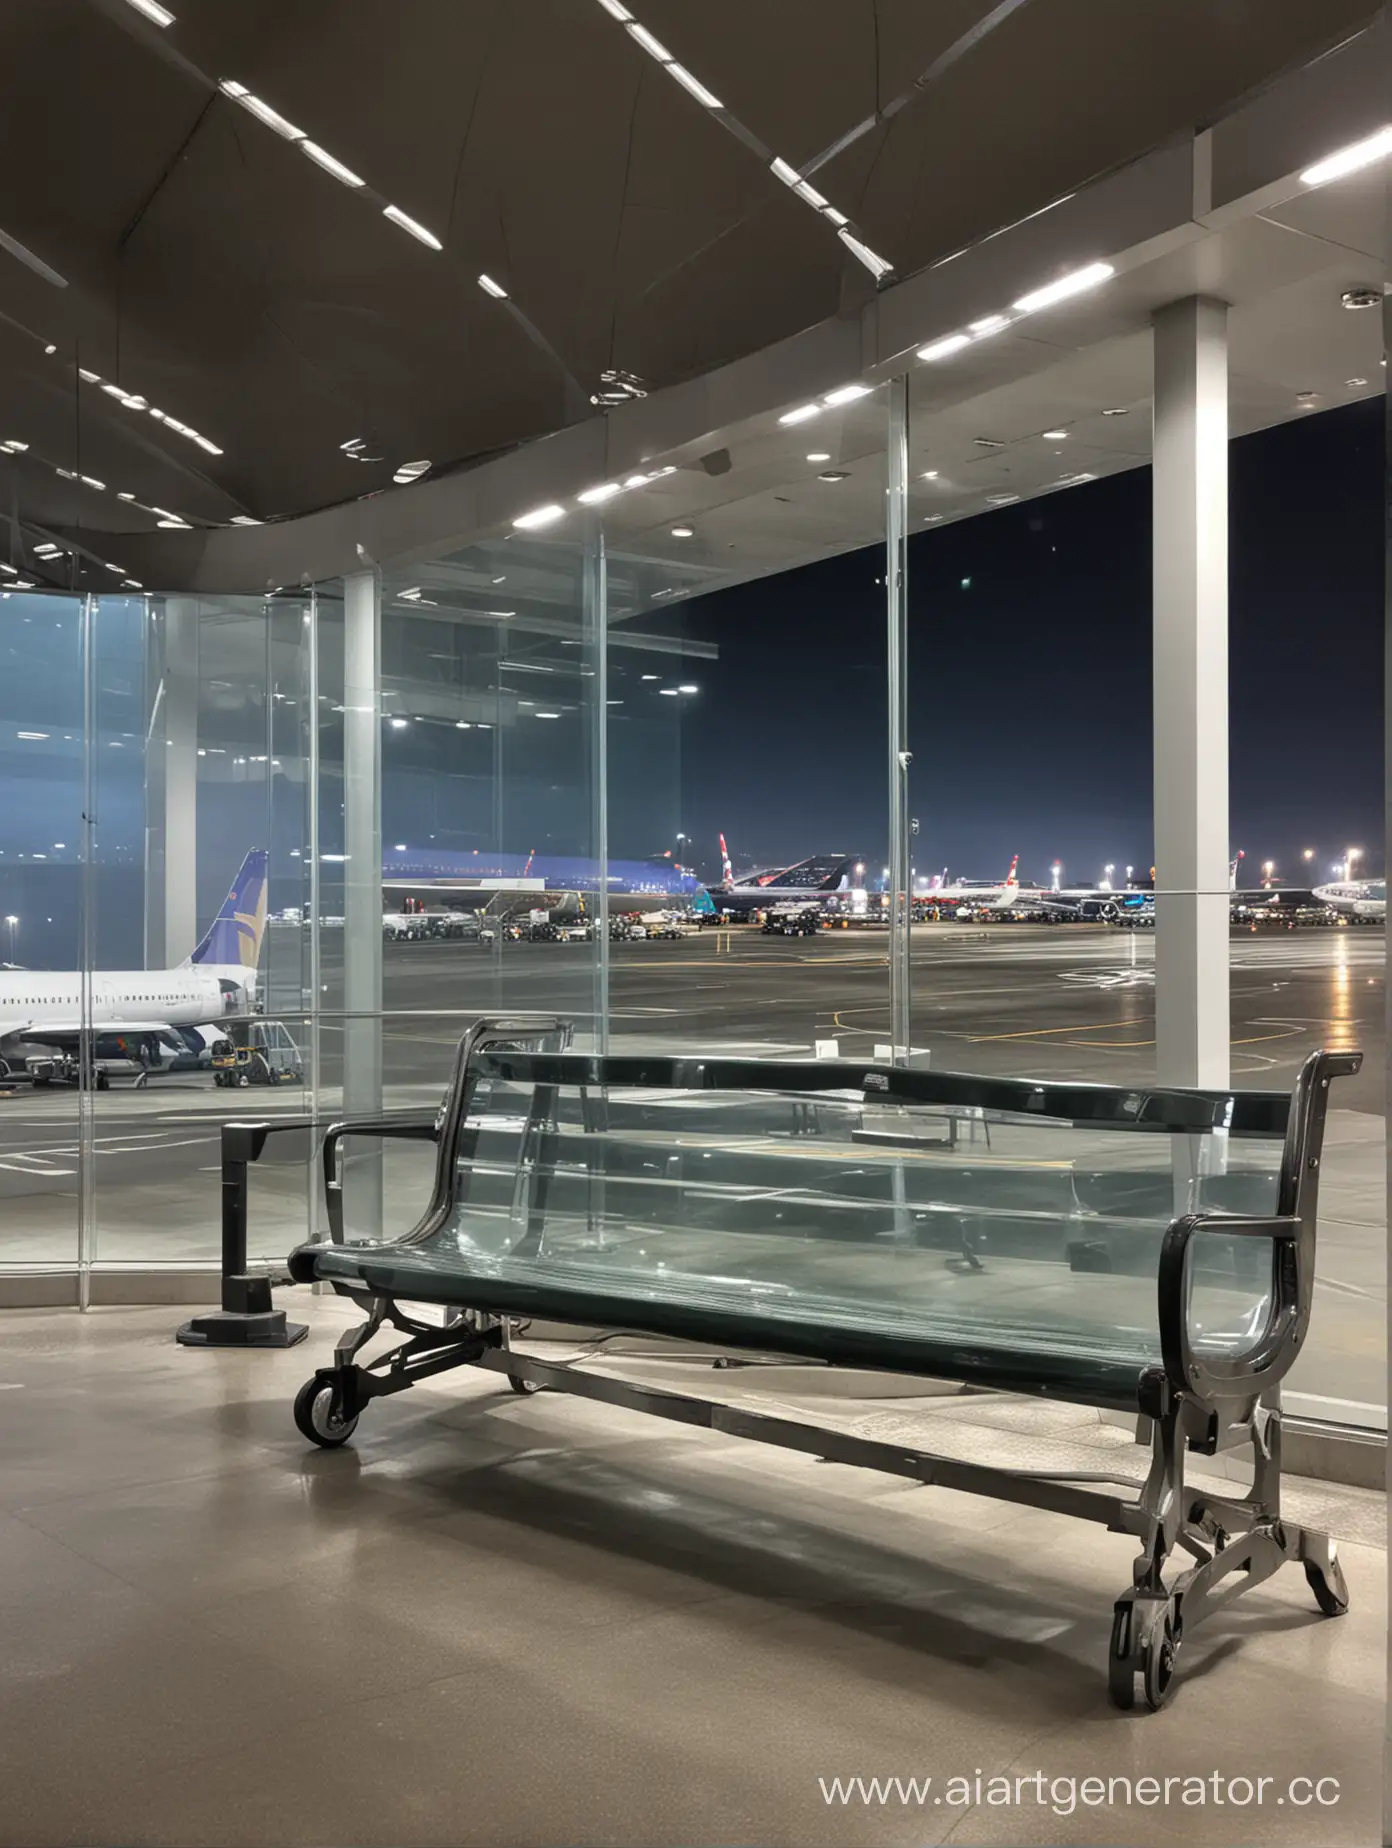 Airport-Bench-with-Nighttime-Runway-View